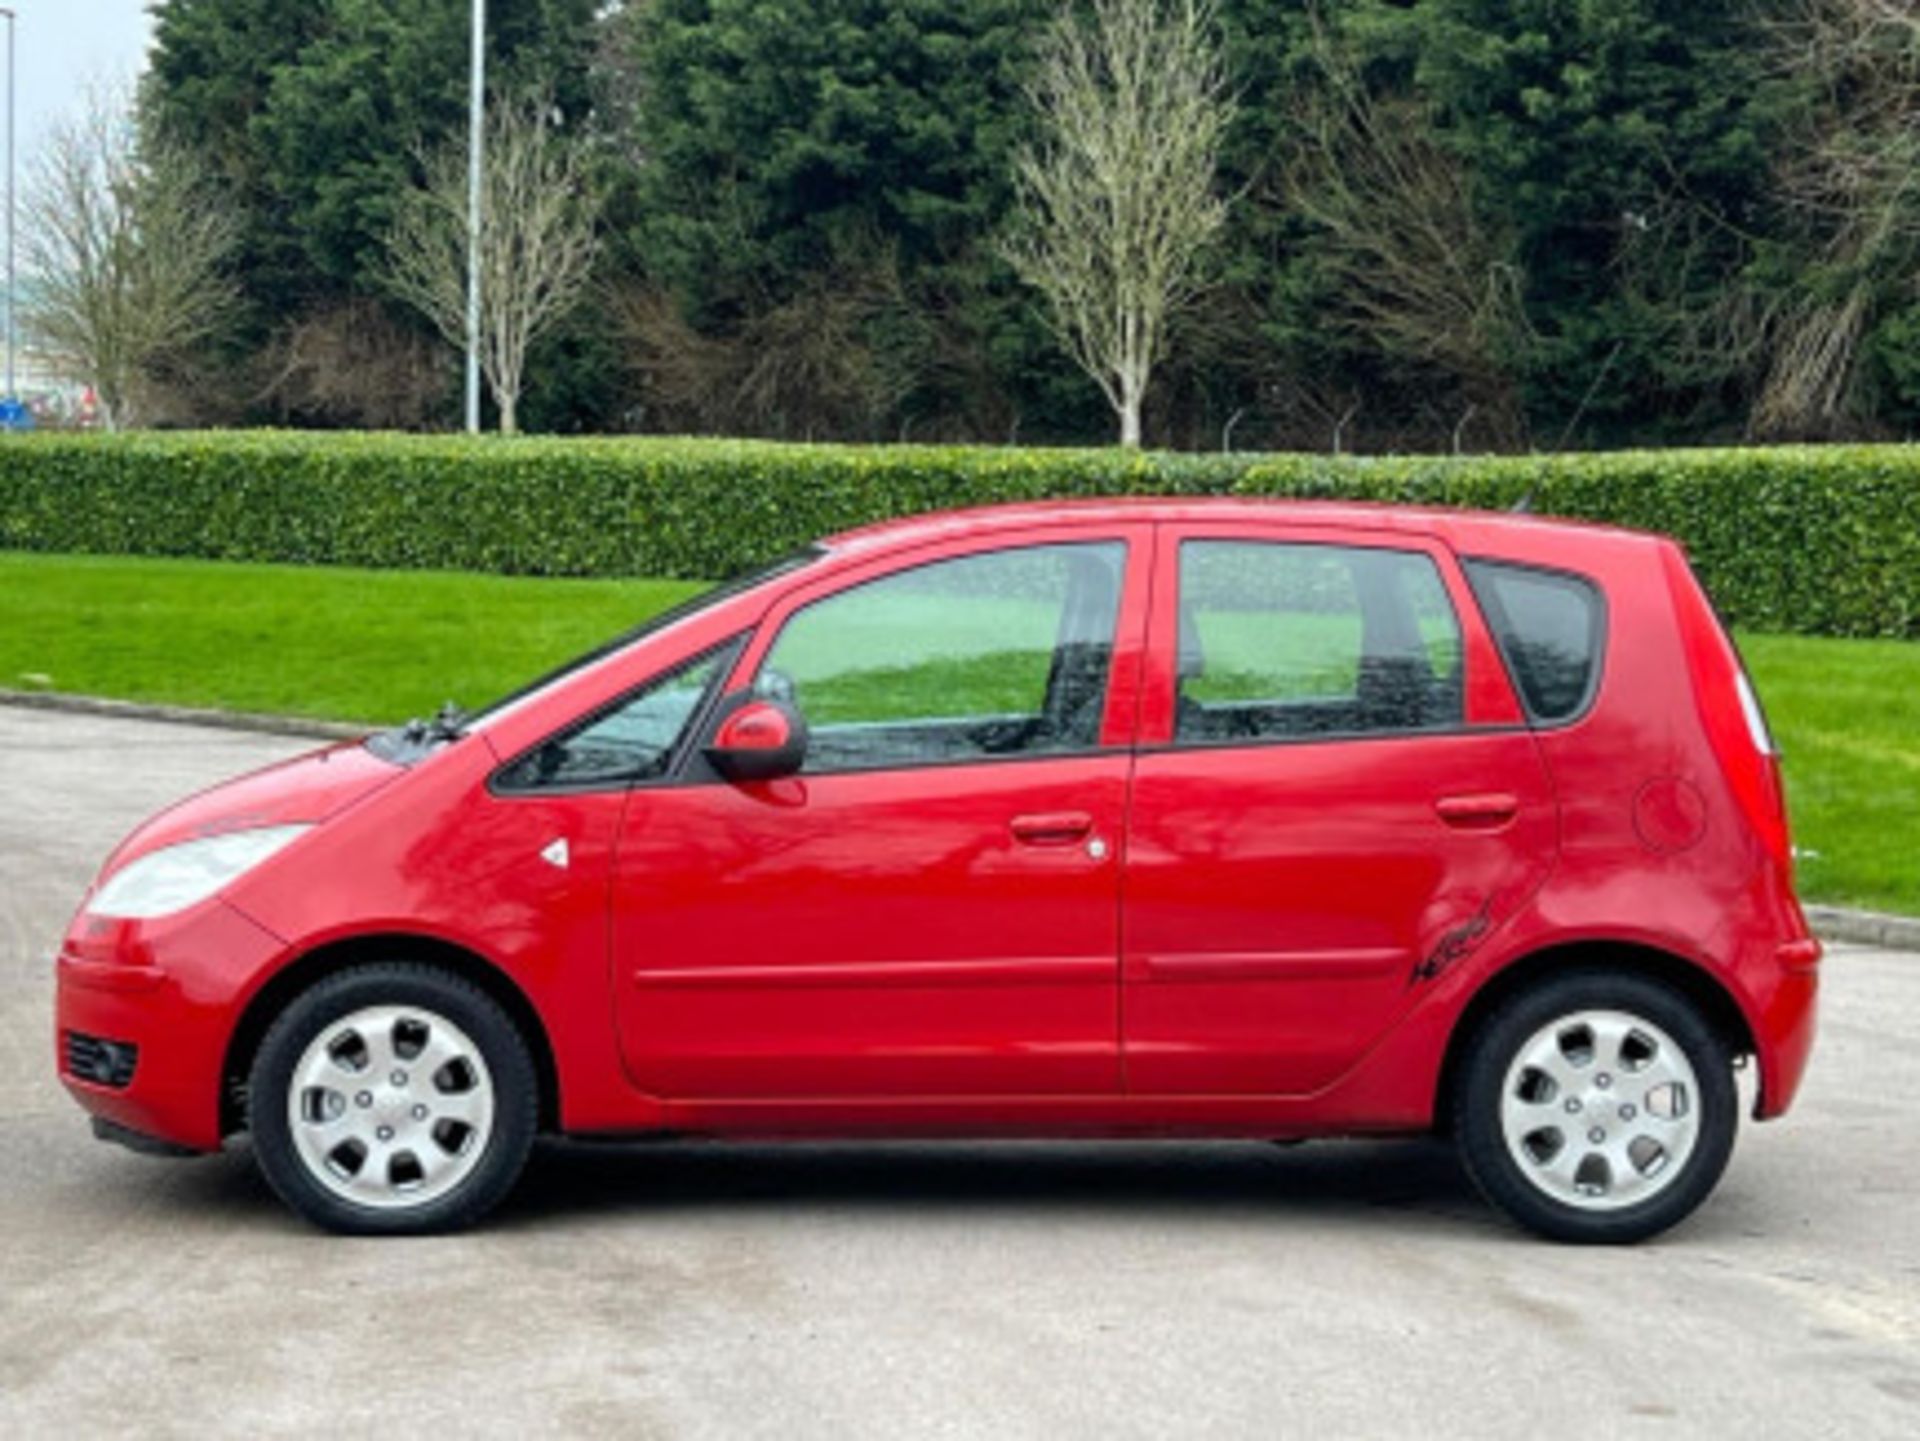 2007 MITSUBISHI COLT 1.5 DI-D DIESEL AUTOMATIC >>--NO VAT ON HAMMER--<< - Image 16 of 127